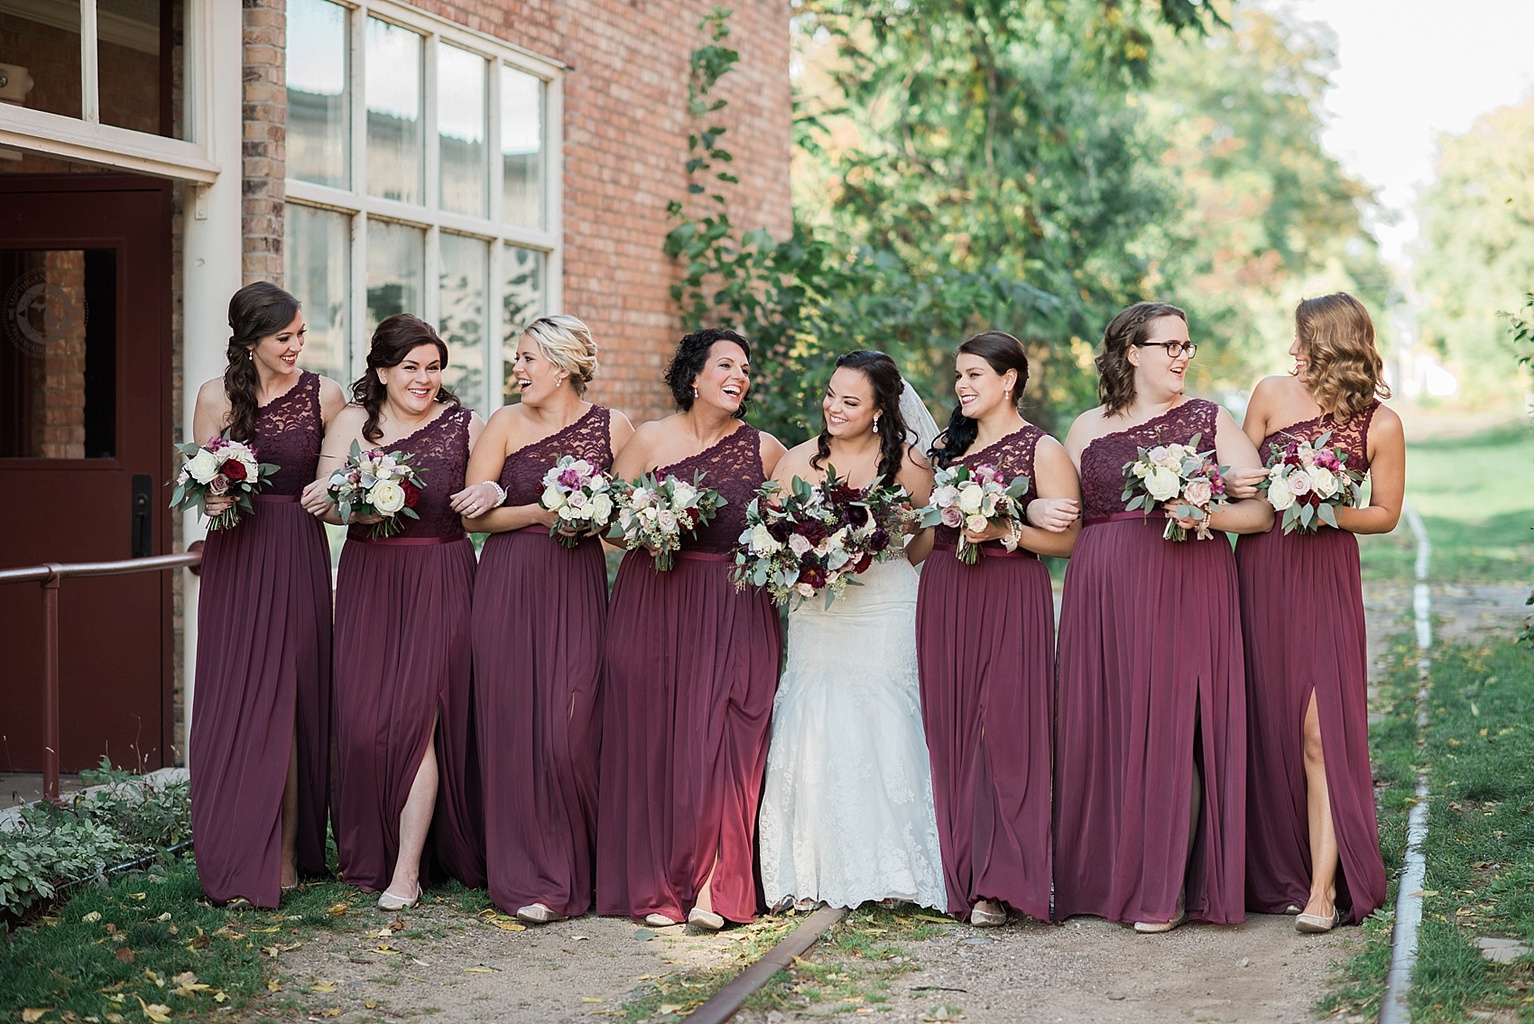 Bridal party photos in Old Town Lansing by Old Town Marquee